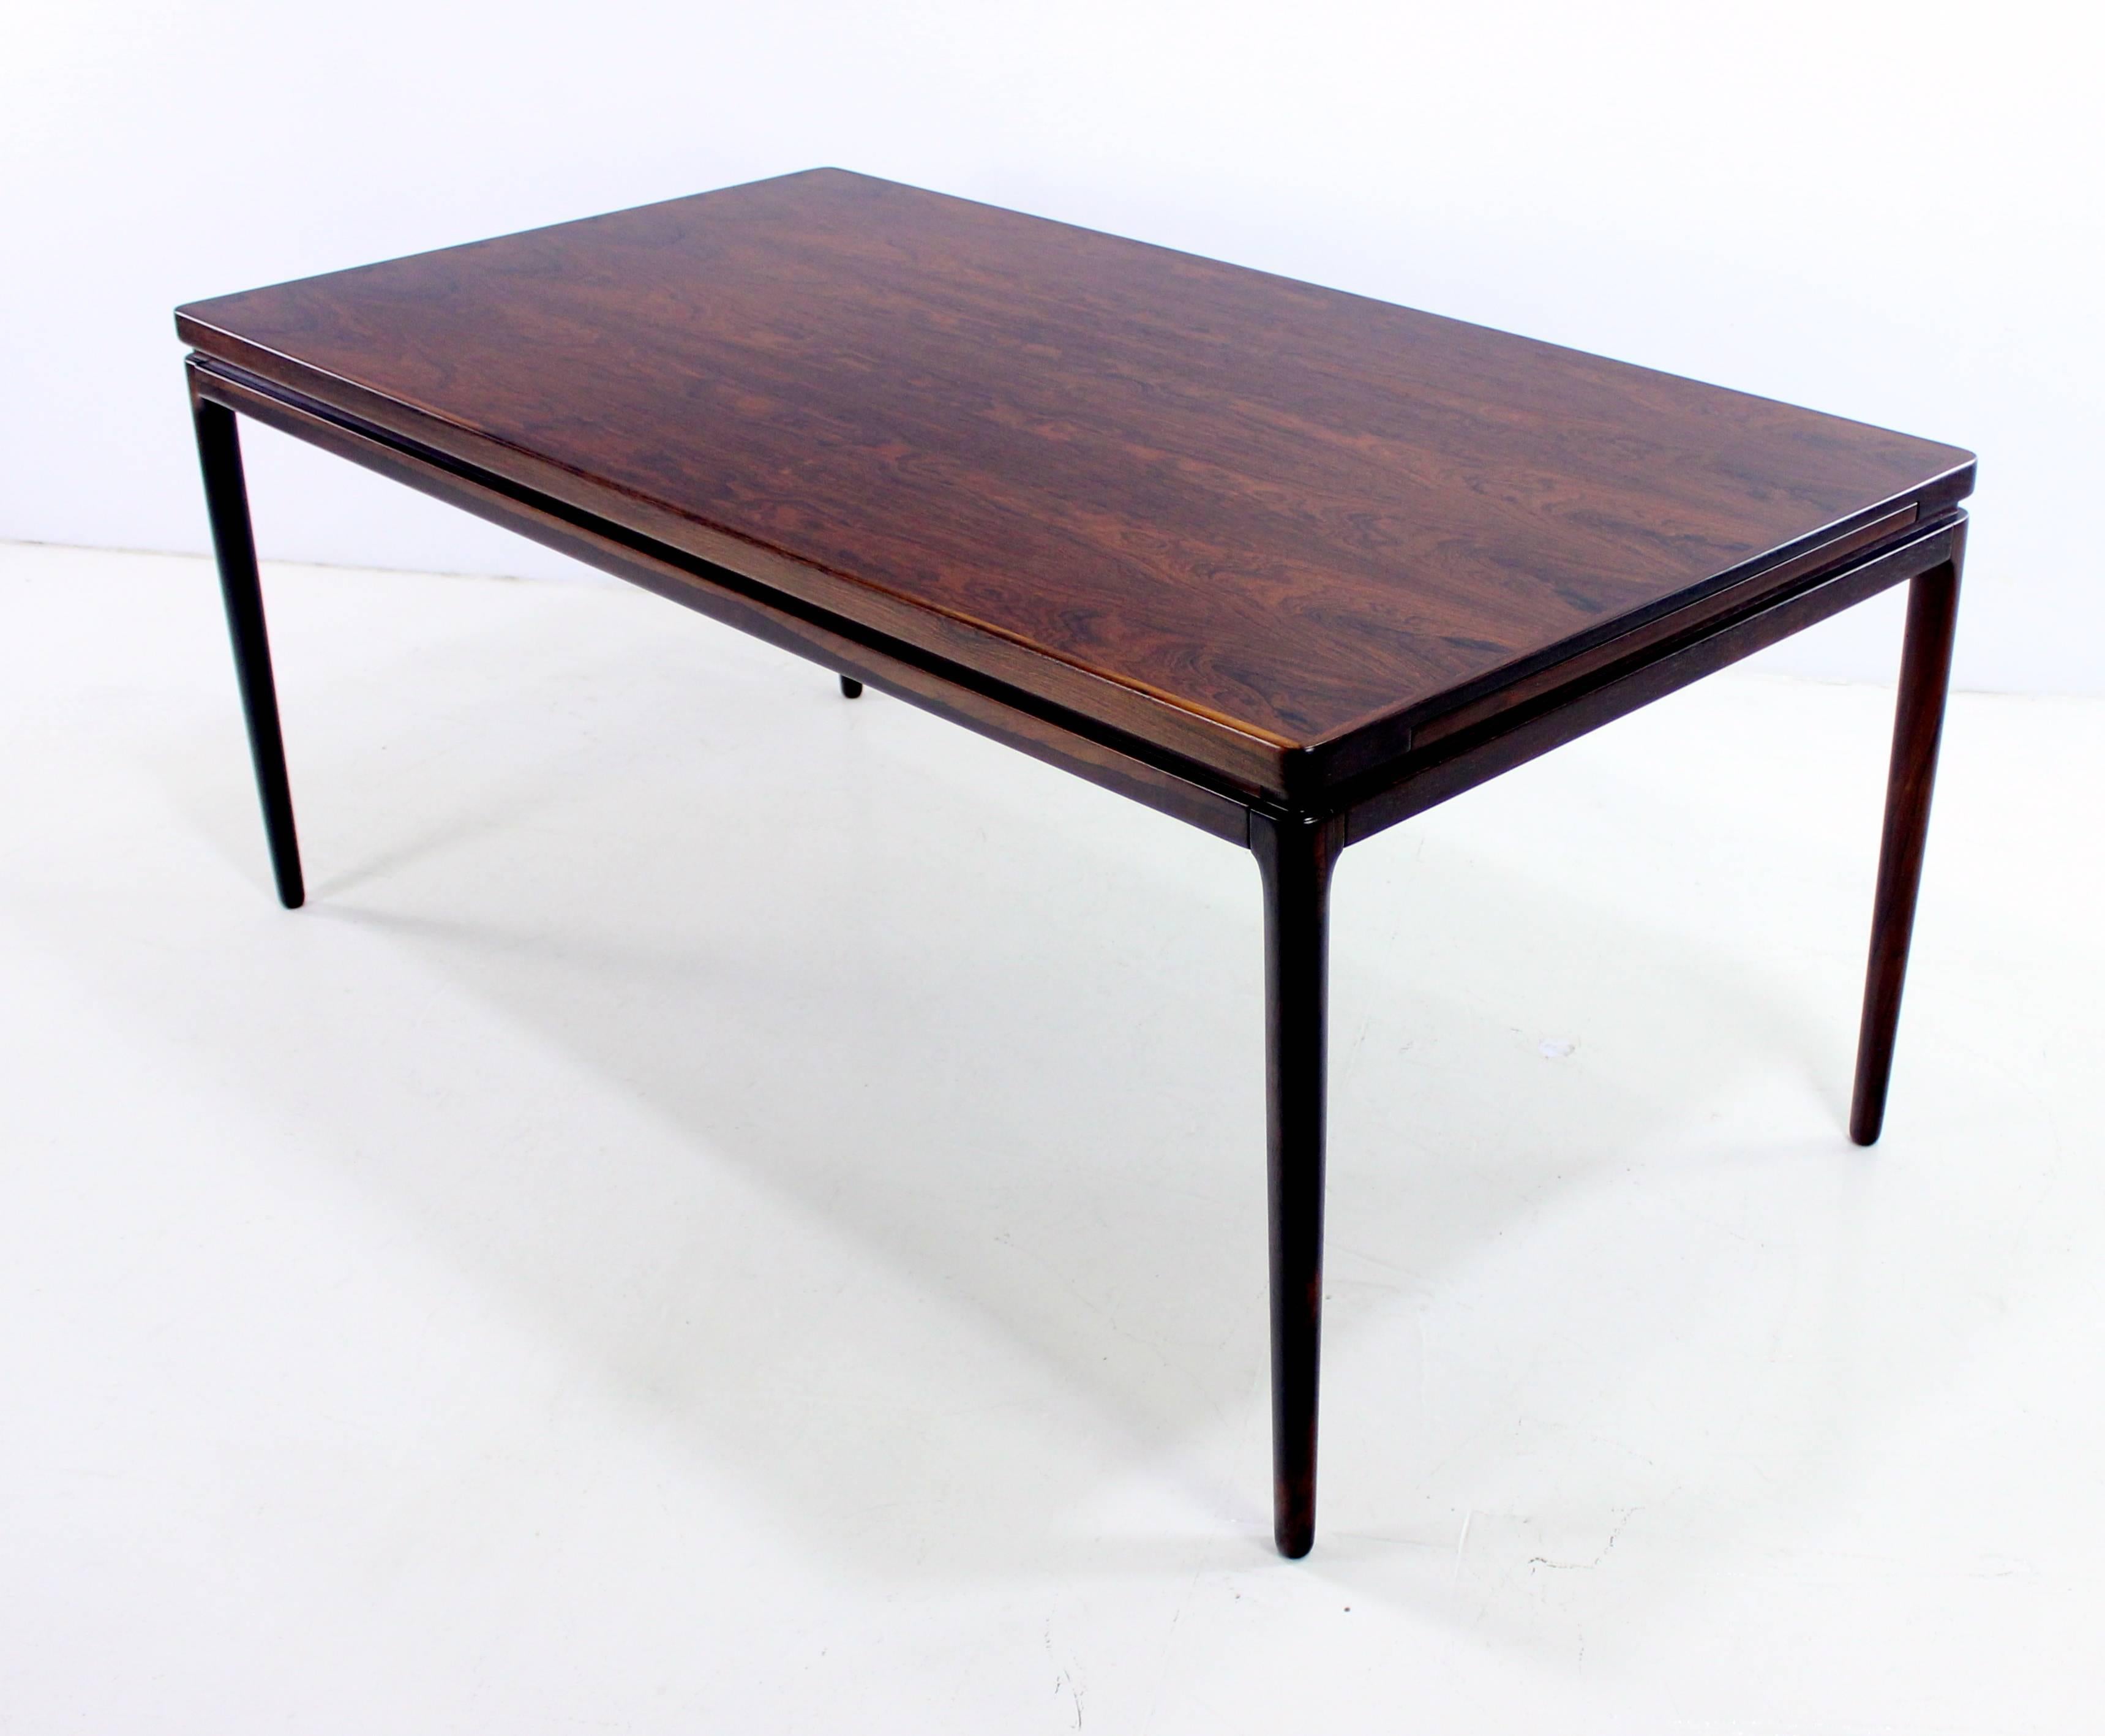 Danish modern dining table designed by Johannes Andersen.
Christian Linneberg, maker.
Richly grained rosewood.
Exceptional style, joinery and craftsmanship.
Two pull-out leaves store under table and provide full extension of